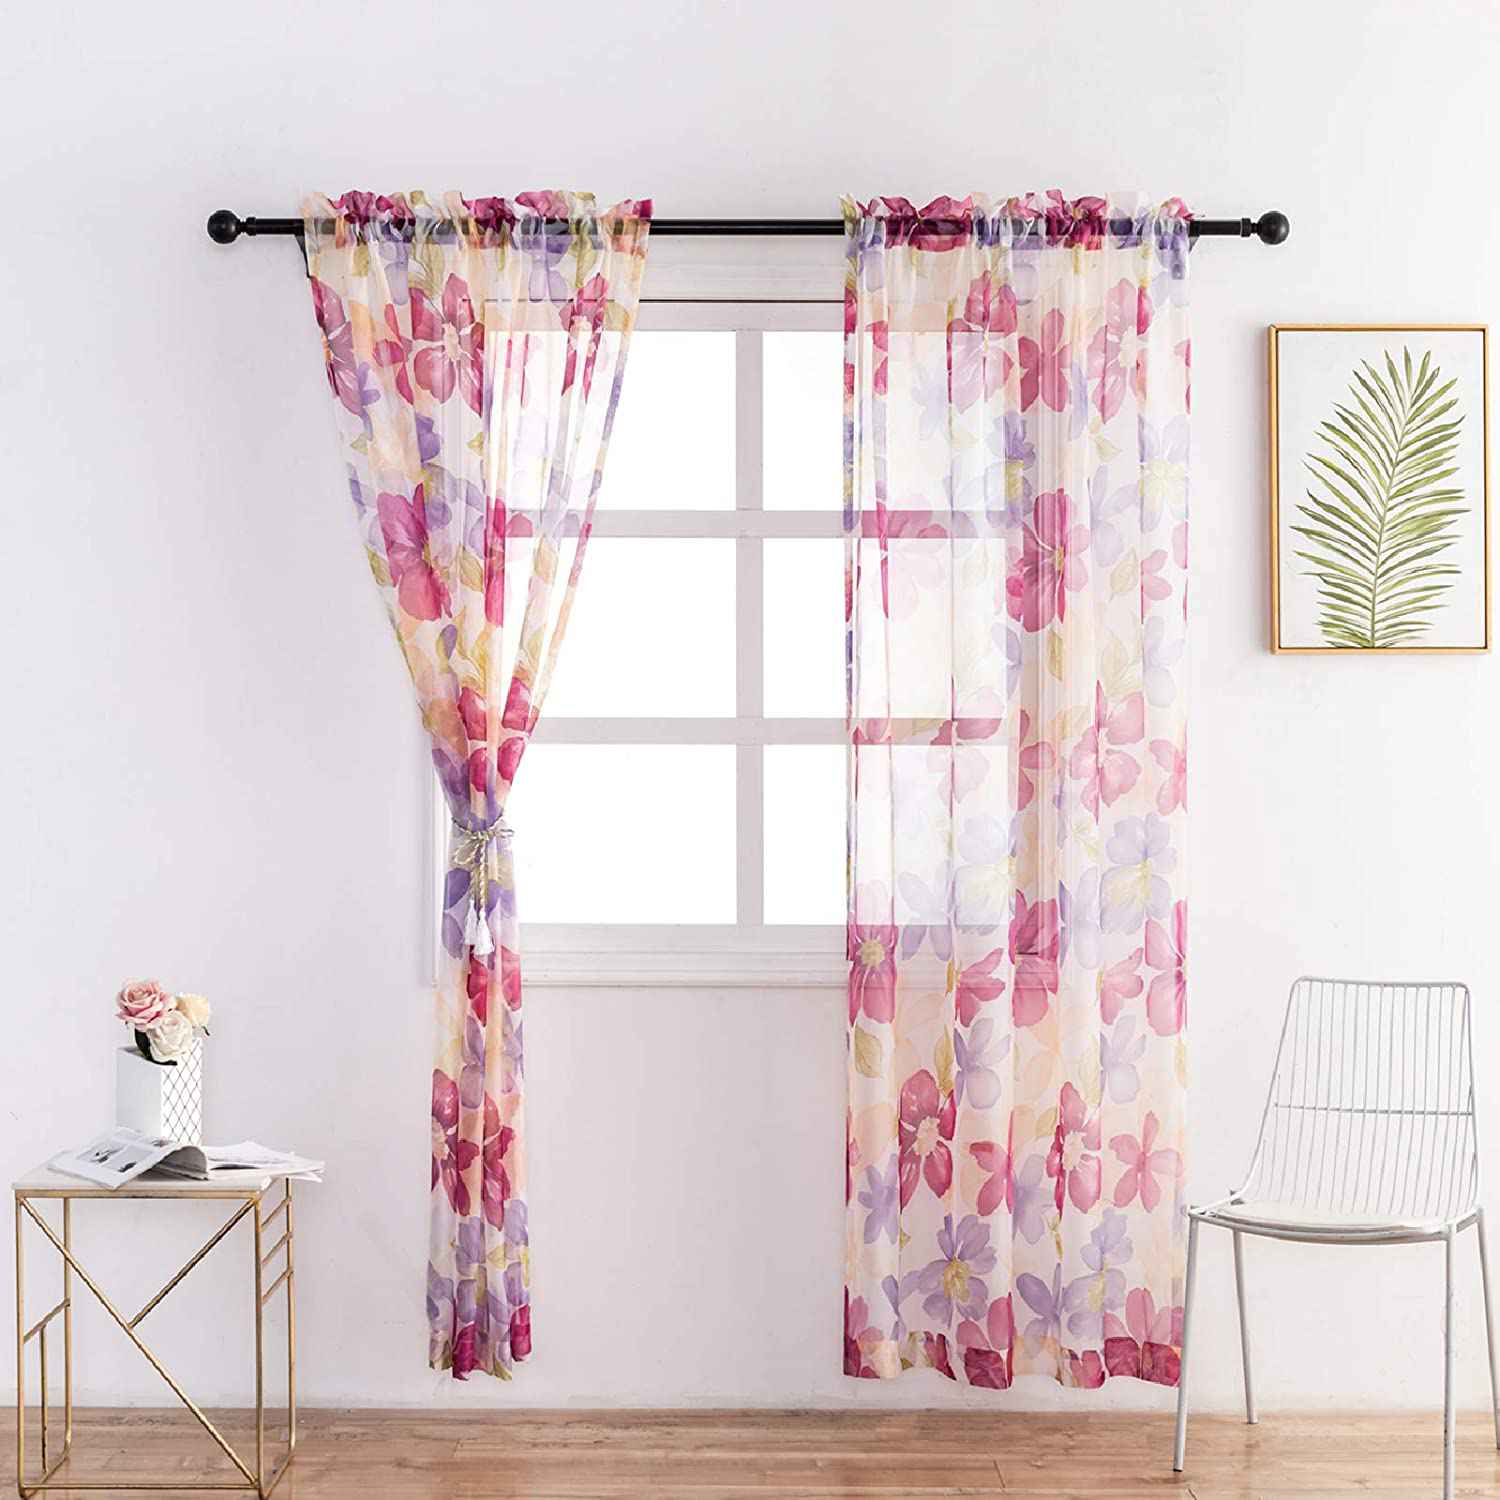 The Transformative Power of Curtains: How Installing Curtains Changes a Room